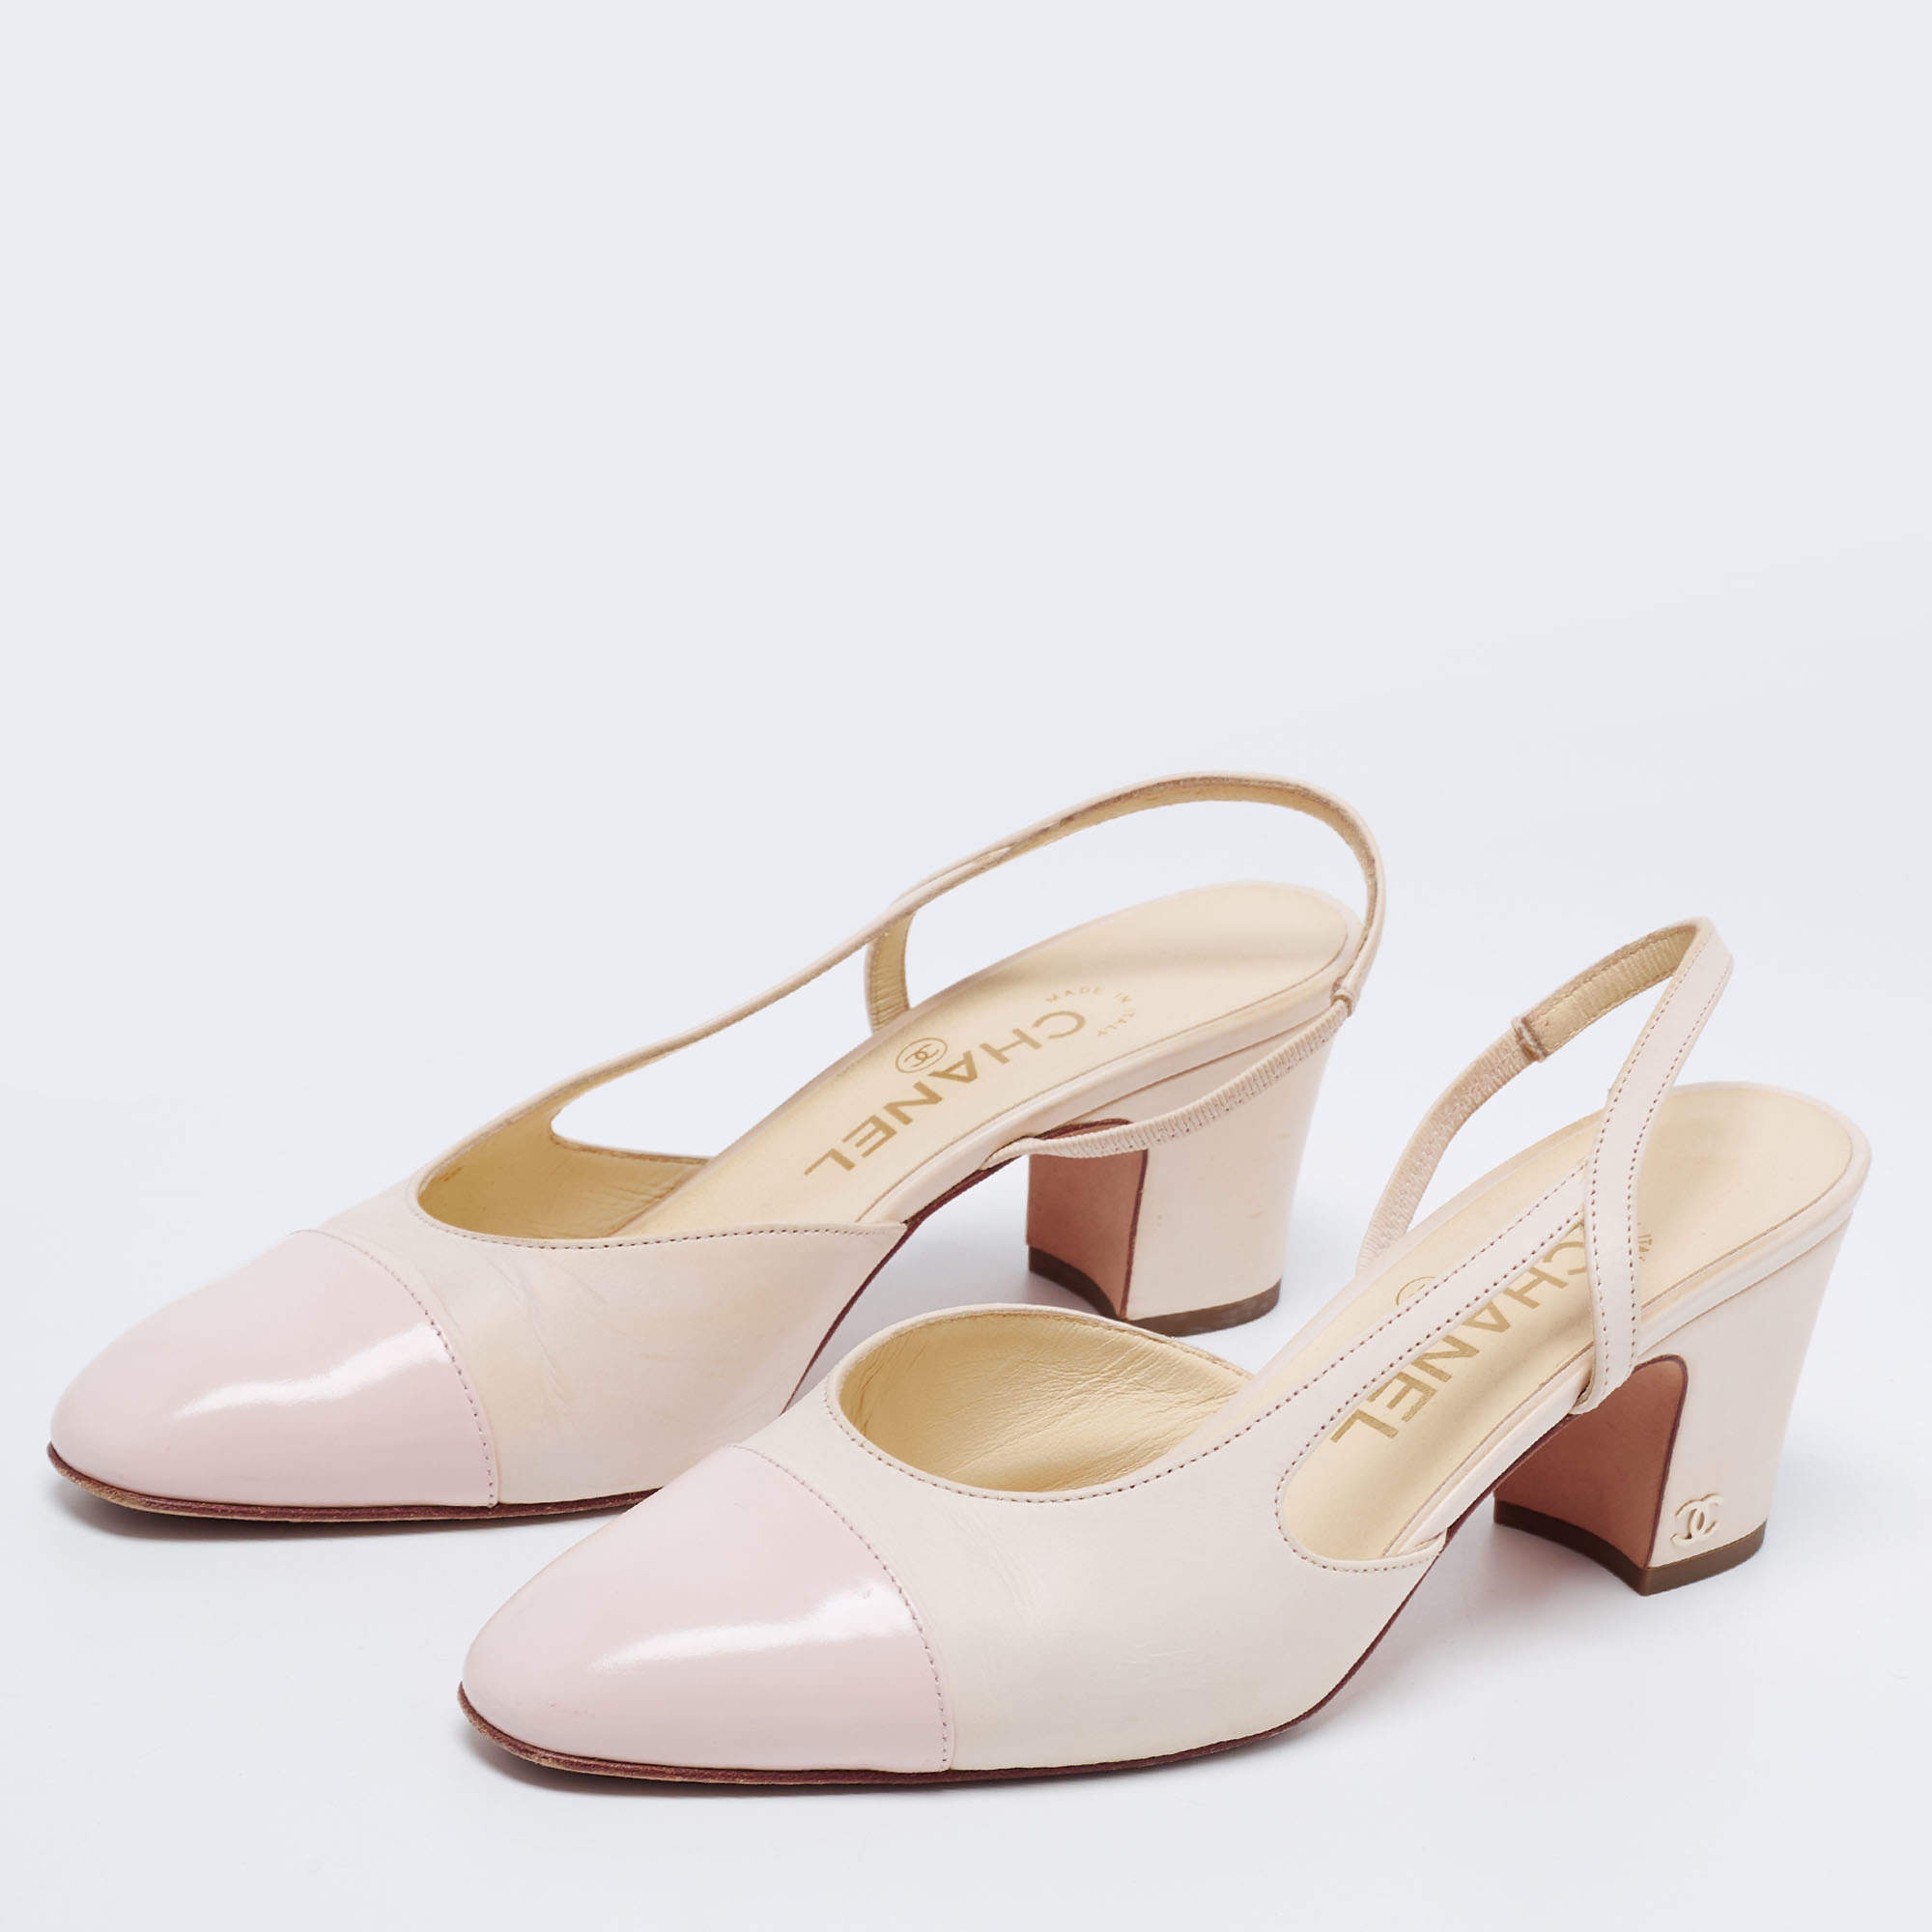 Chanel Cream/Light Pink Leather and Patent Cap Toe Block Heel Slingback  Pumps Size 38